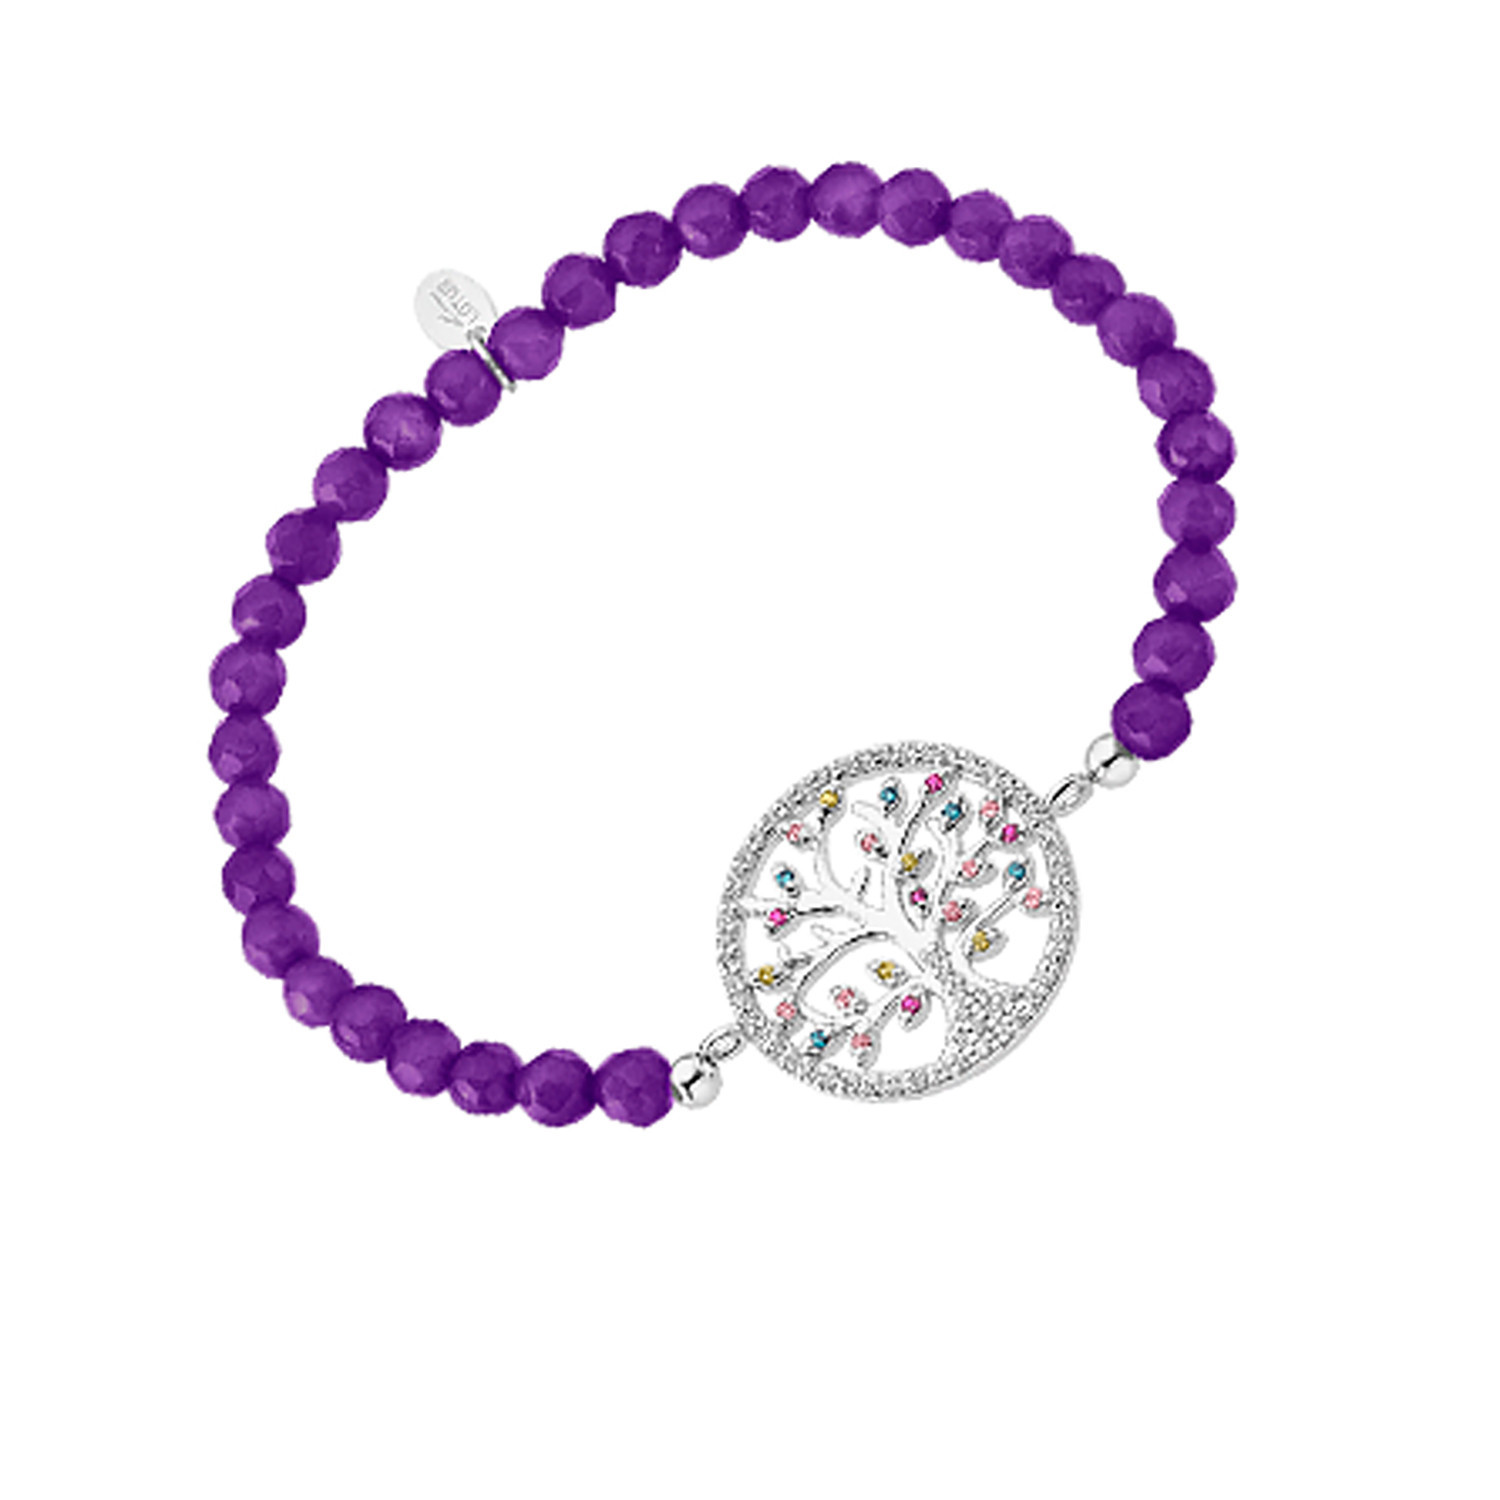 Bracelet Lotus Silver Collection Family Tree
amethyste